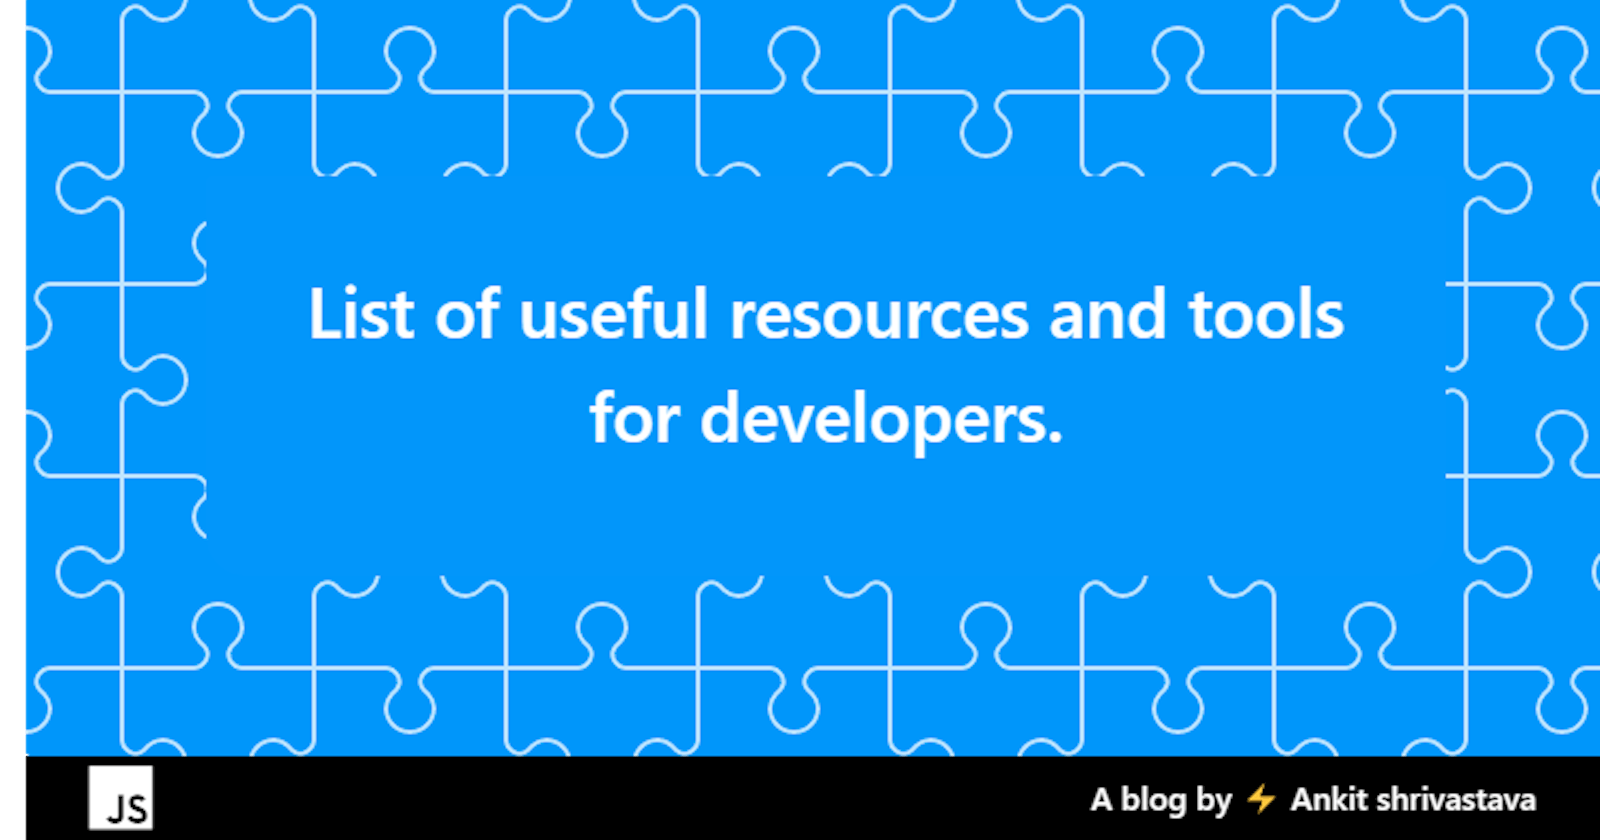 List of useful resources and tools for developers.